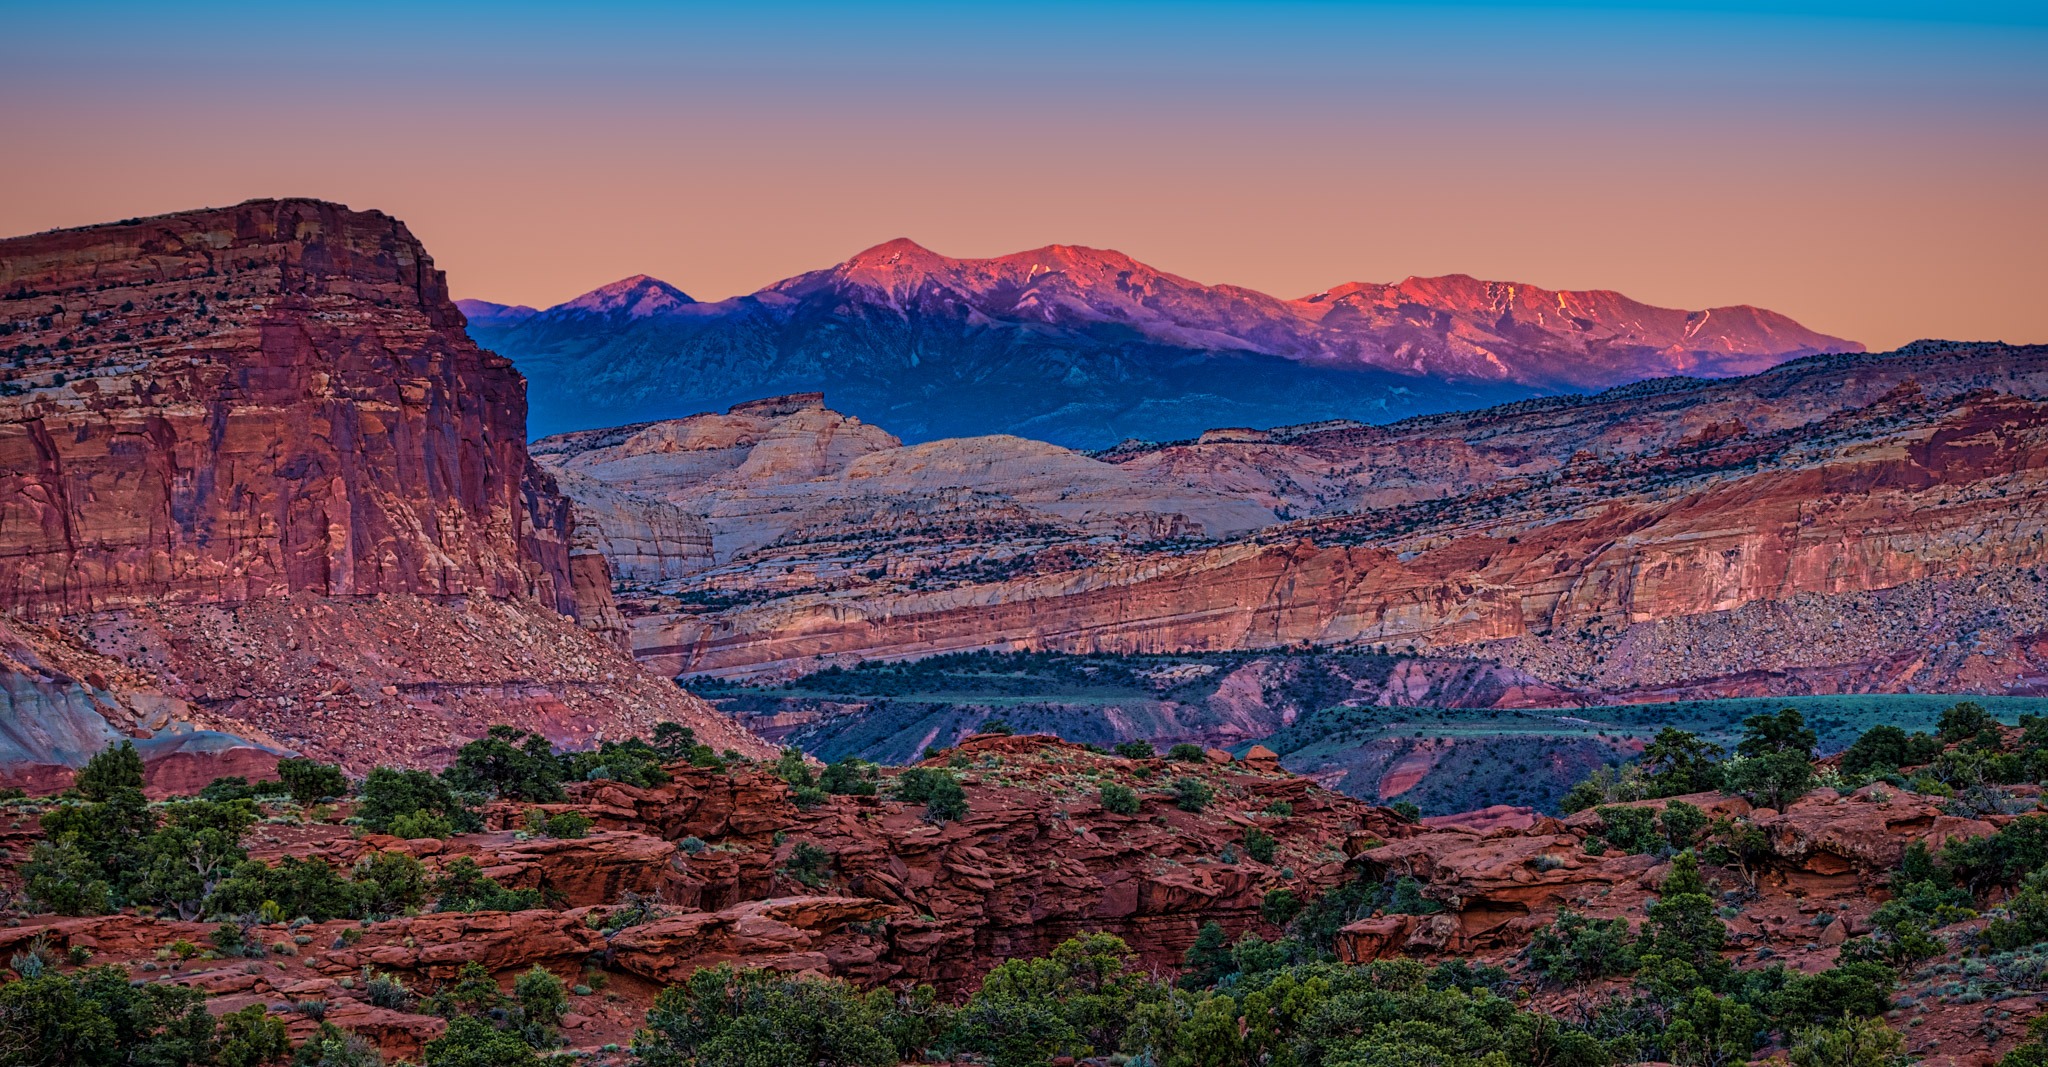 Twilight as seen from Panorama Point along Highway 24 in Capitol Reef National Park, Utah.